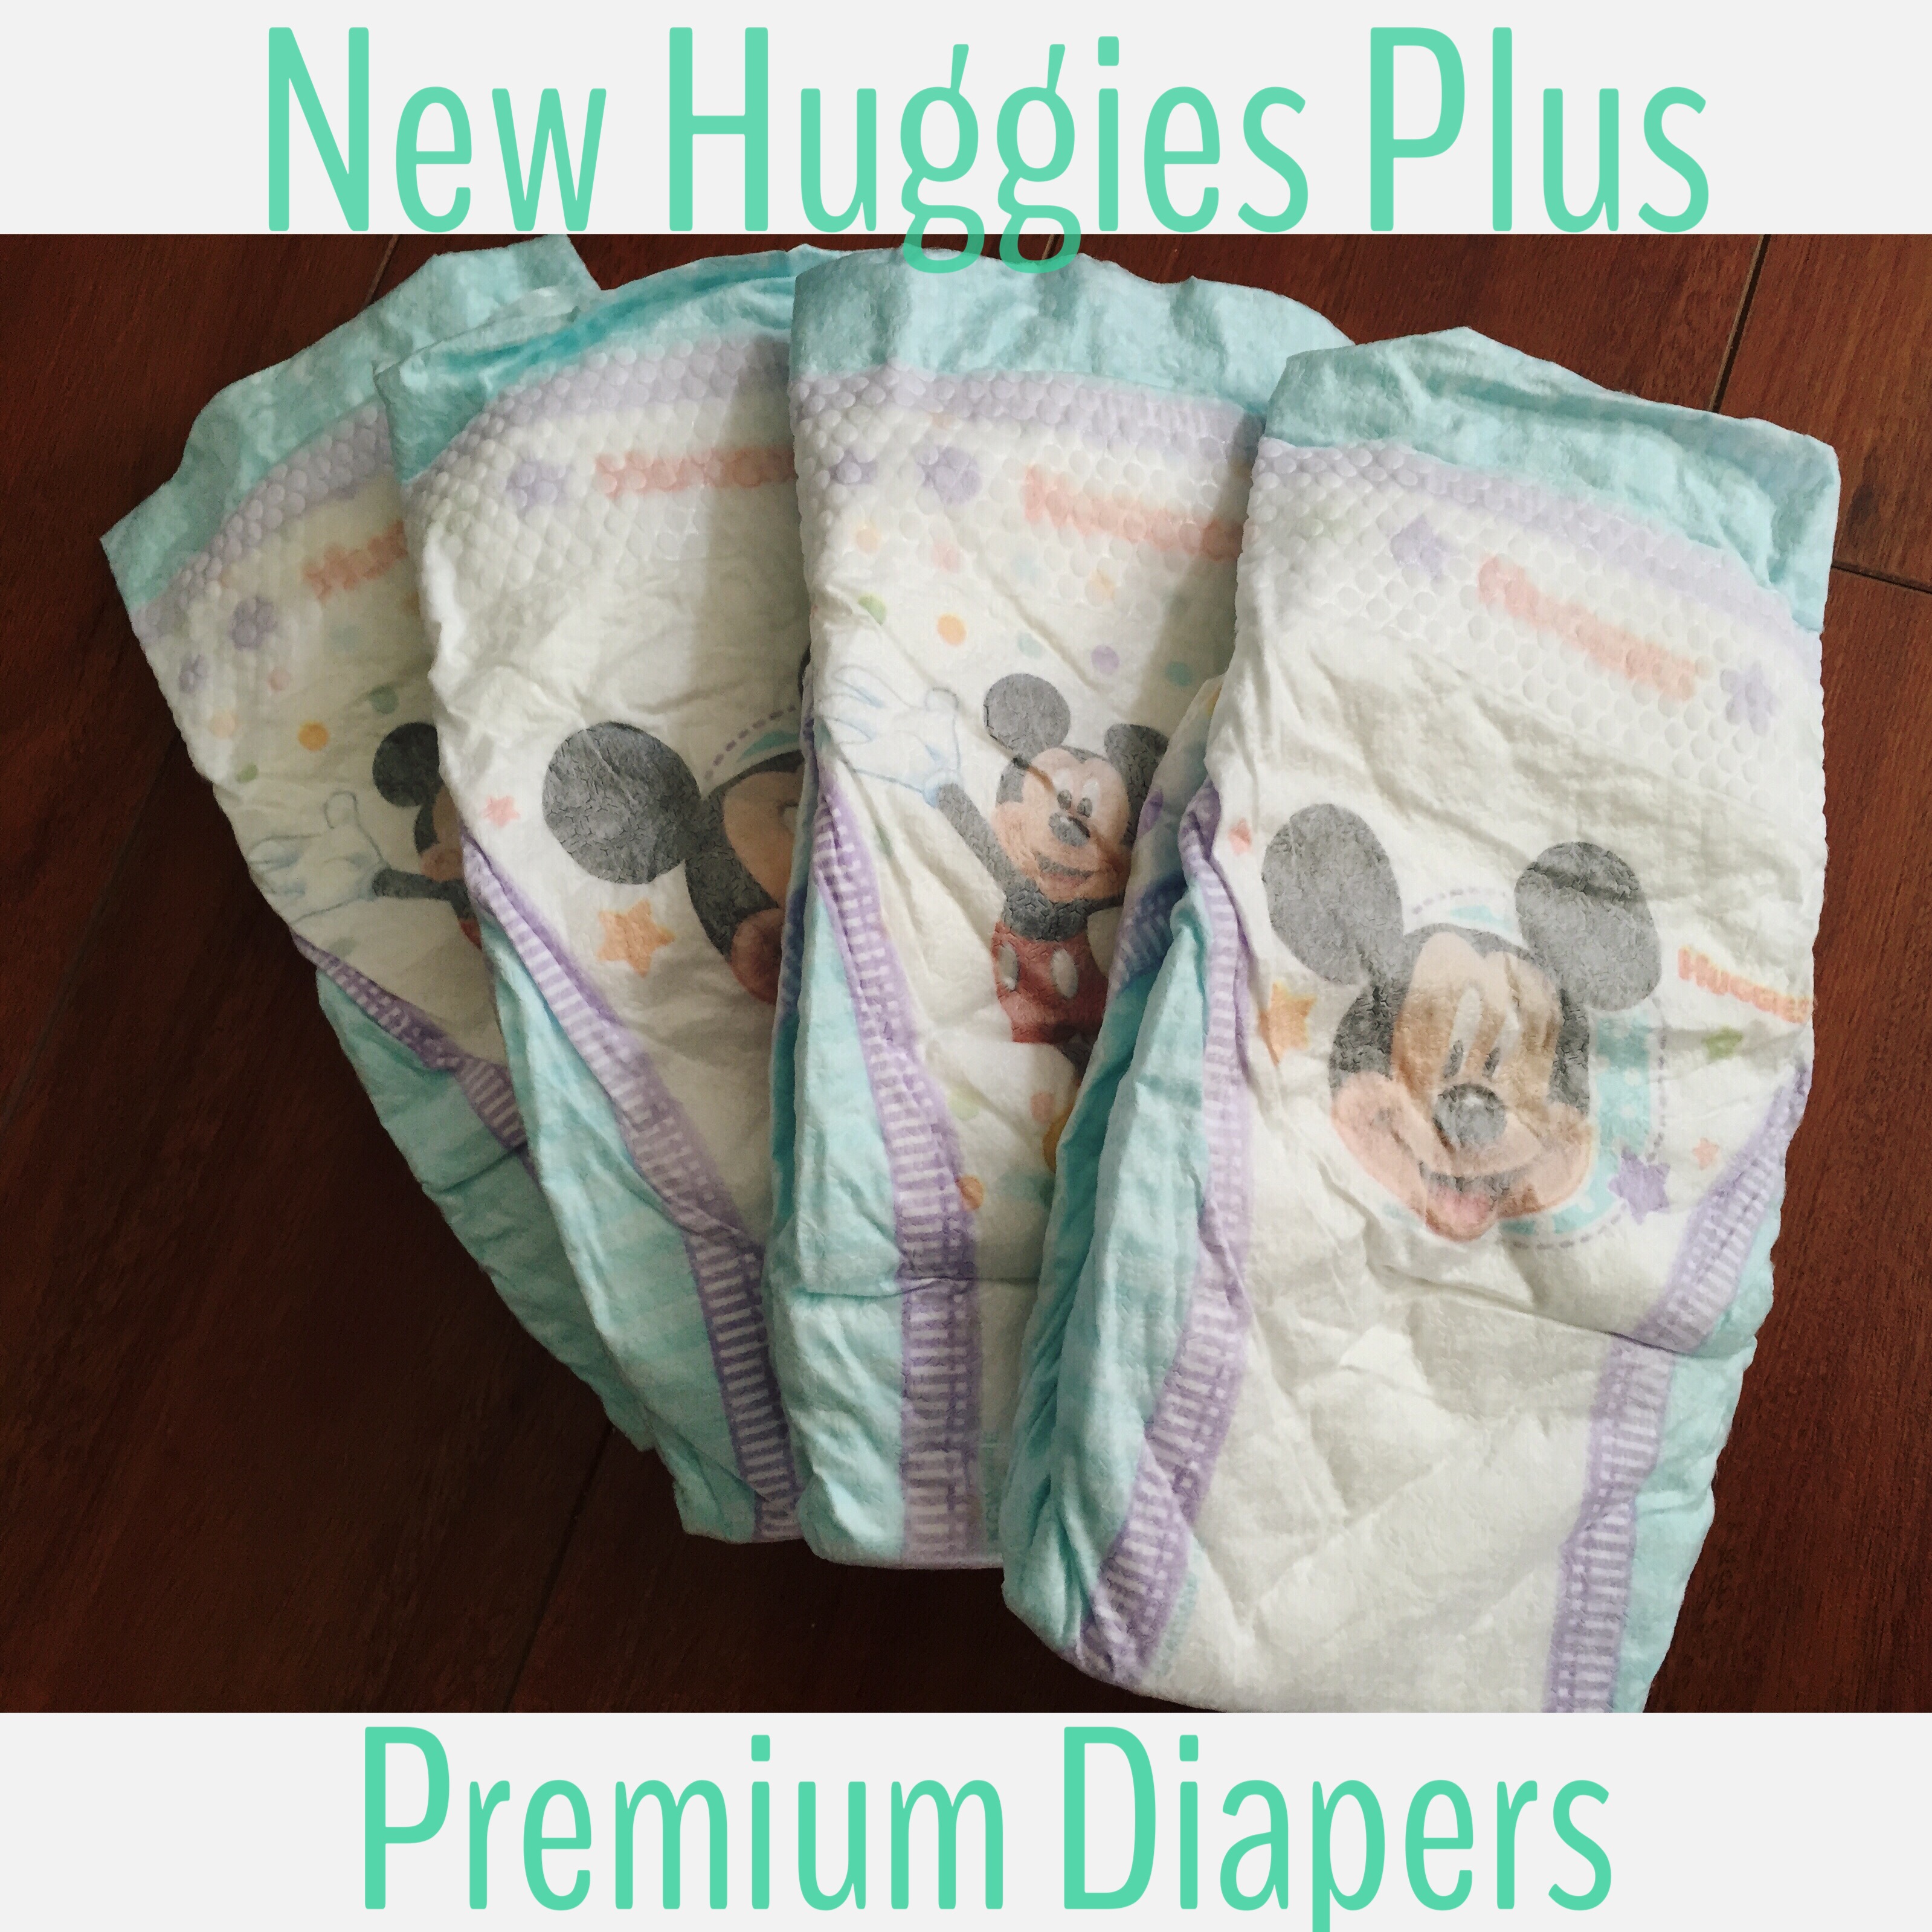 Benefits and features of huggies little movers plus diapers